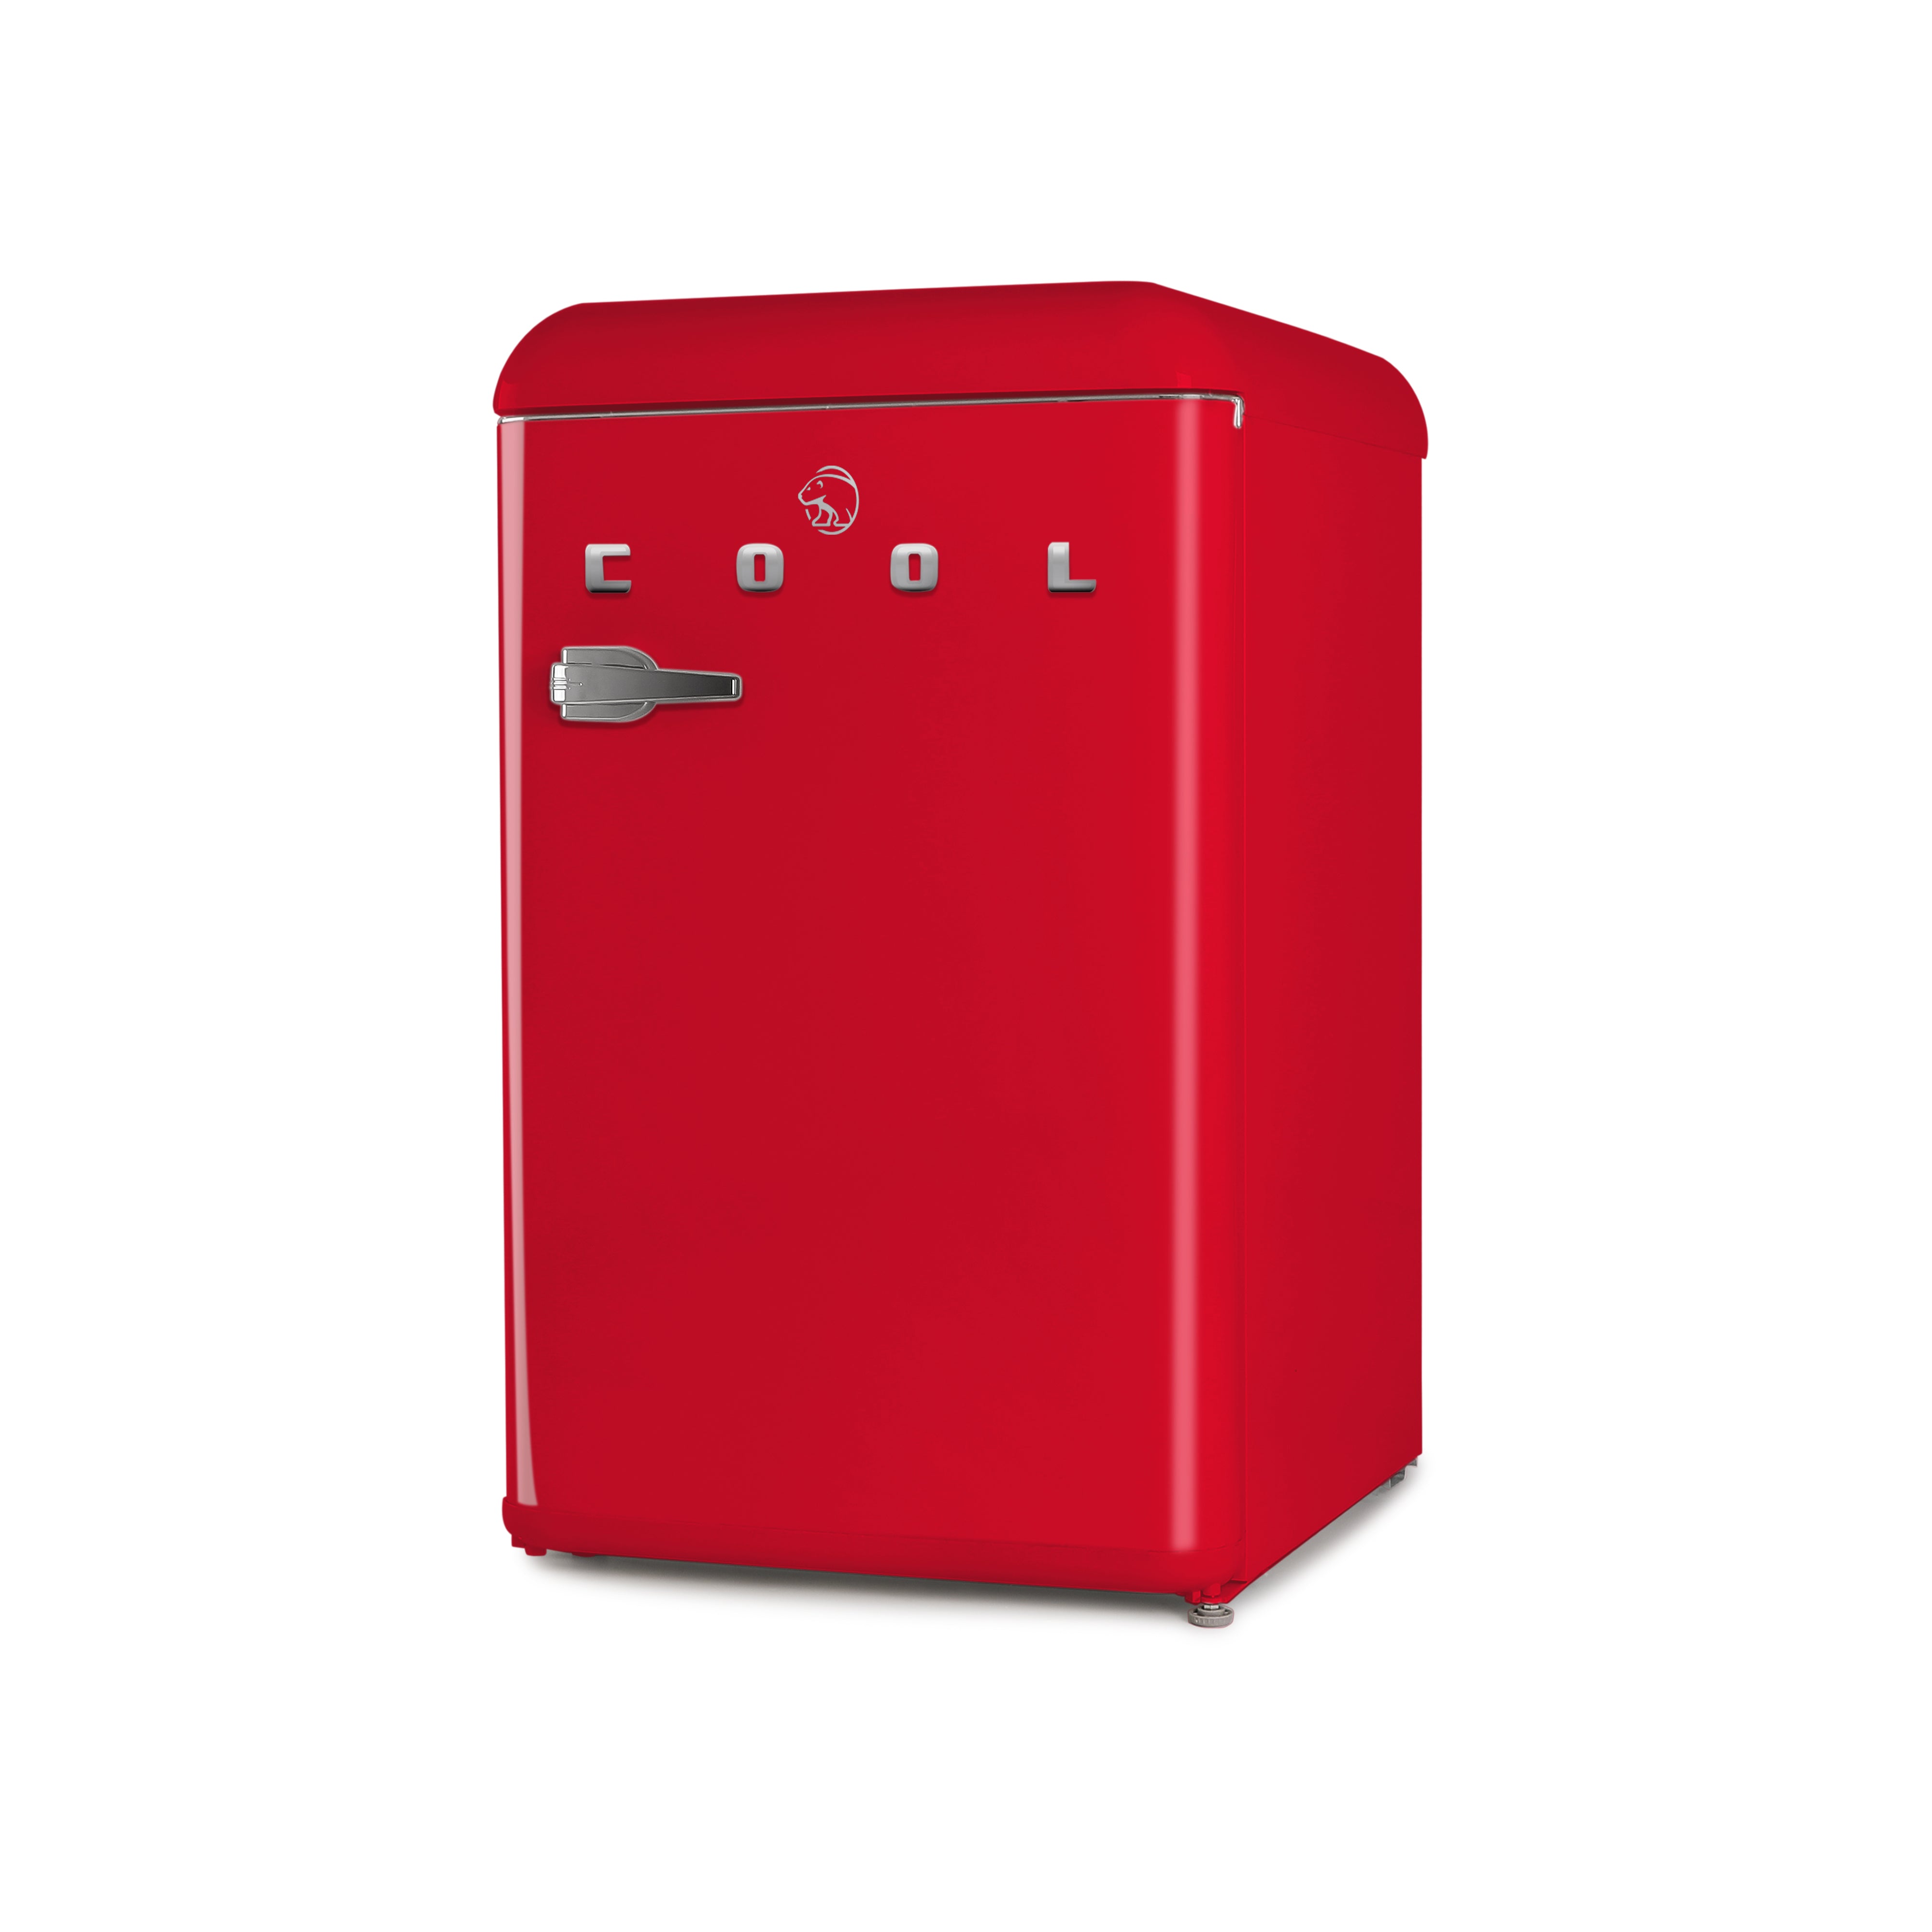 COMMERCIAL COOL Retro All-Refrigerator 4.4 Cu. Ft., Red